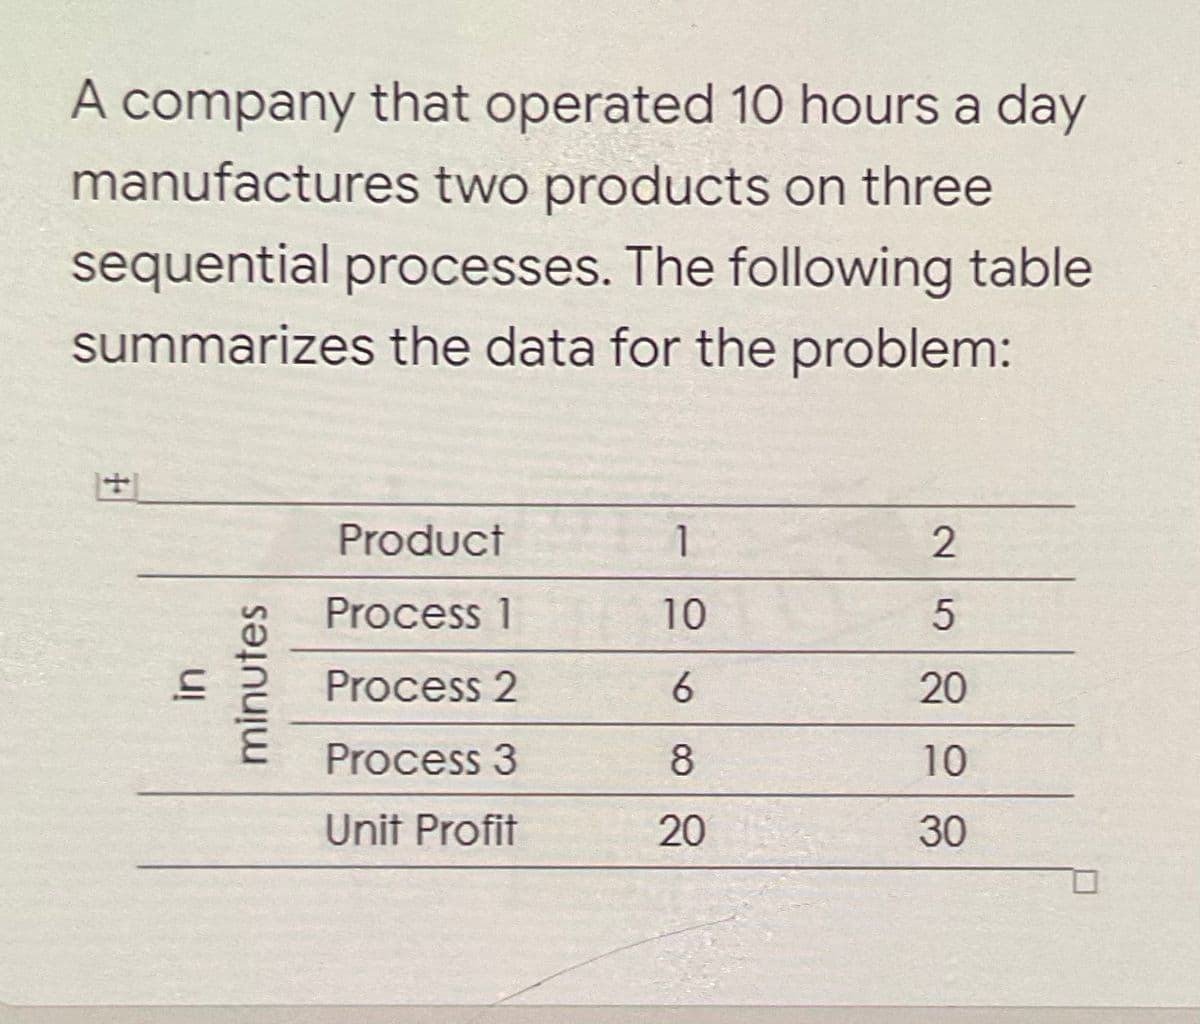 A company that operated 10 hours a day
manufactures two products on three
sequential processes. The following table
summarizes the data for the problem:
+1
Product
1
2
Process 1
10
Process 2
20
Process 3
10
Unit Profit
20
30
minutes
